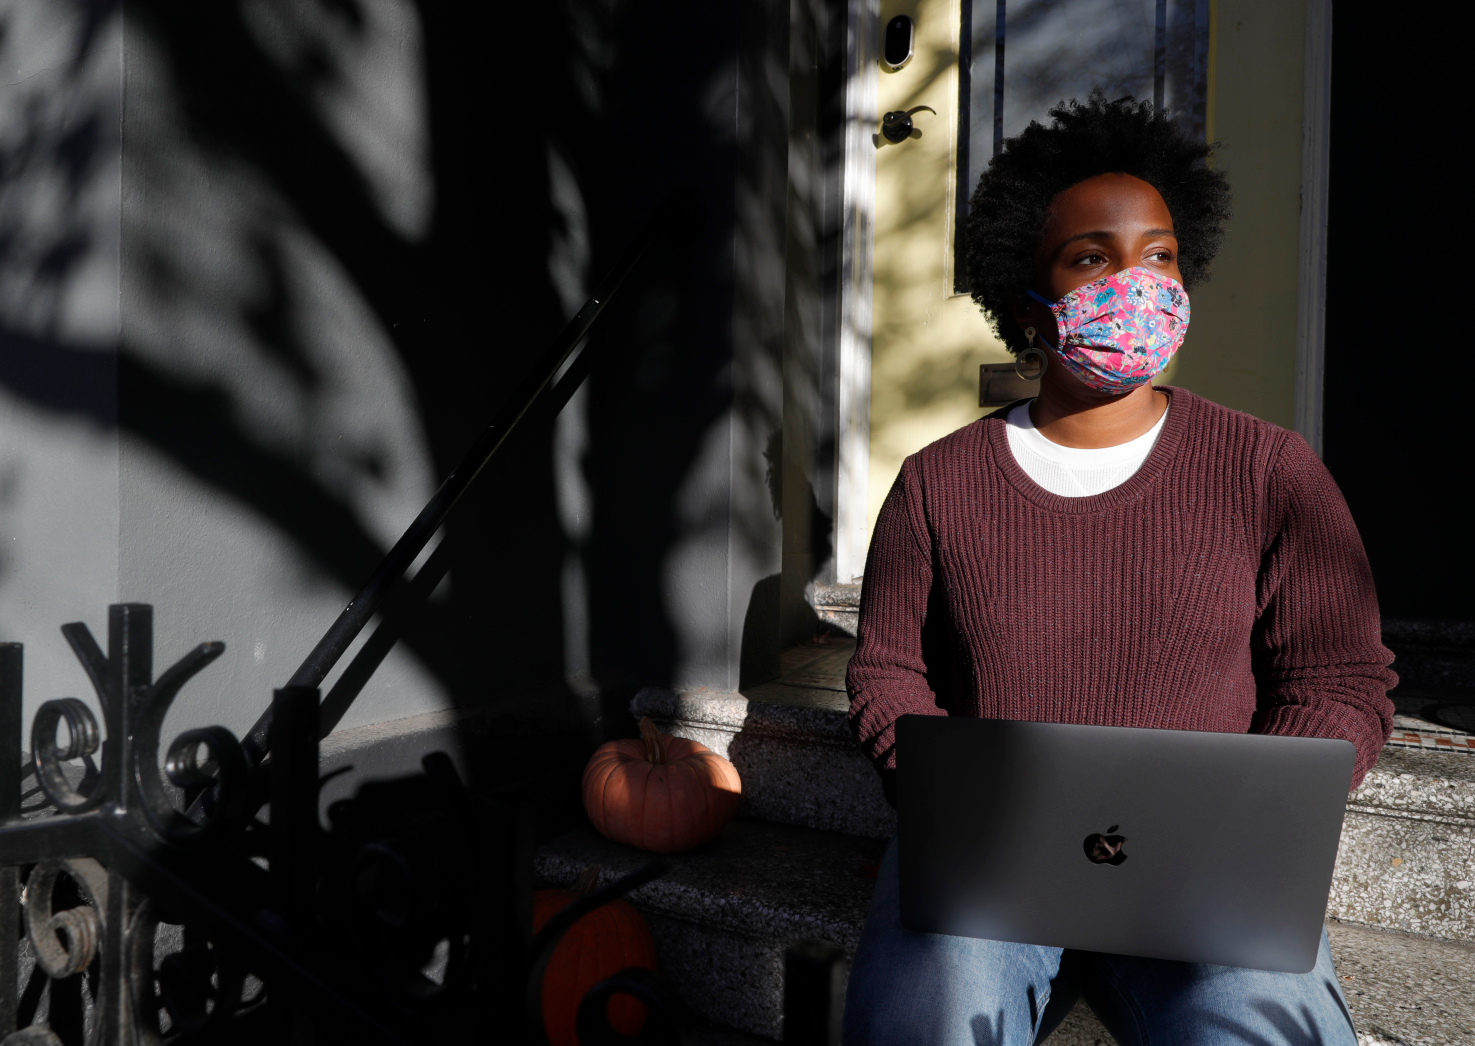 Pandemic creates “weird boom time” for some Bay Area remote workers